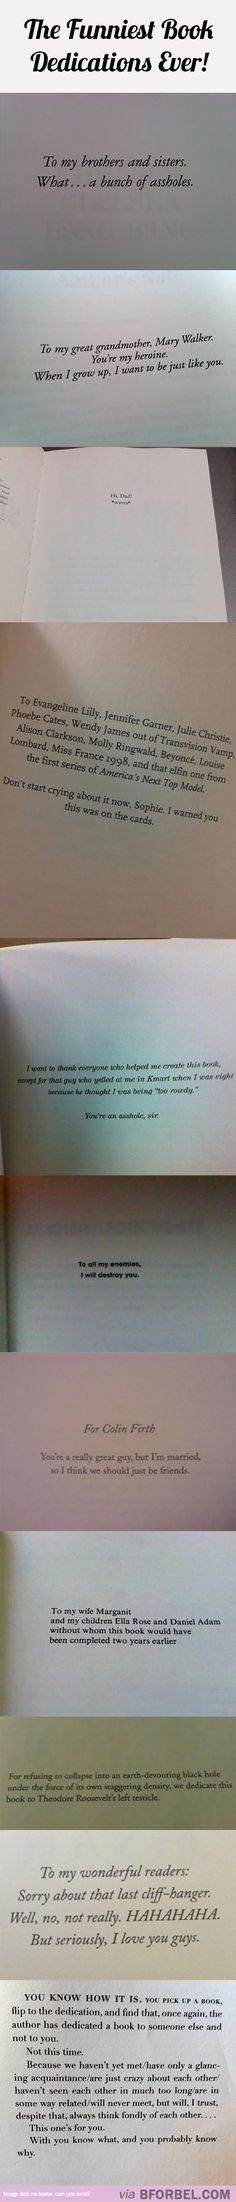 i always read the book dedication before starting a novel theyre